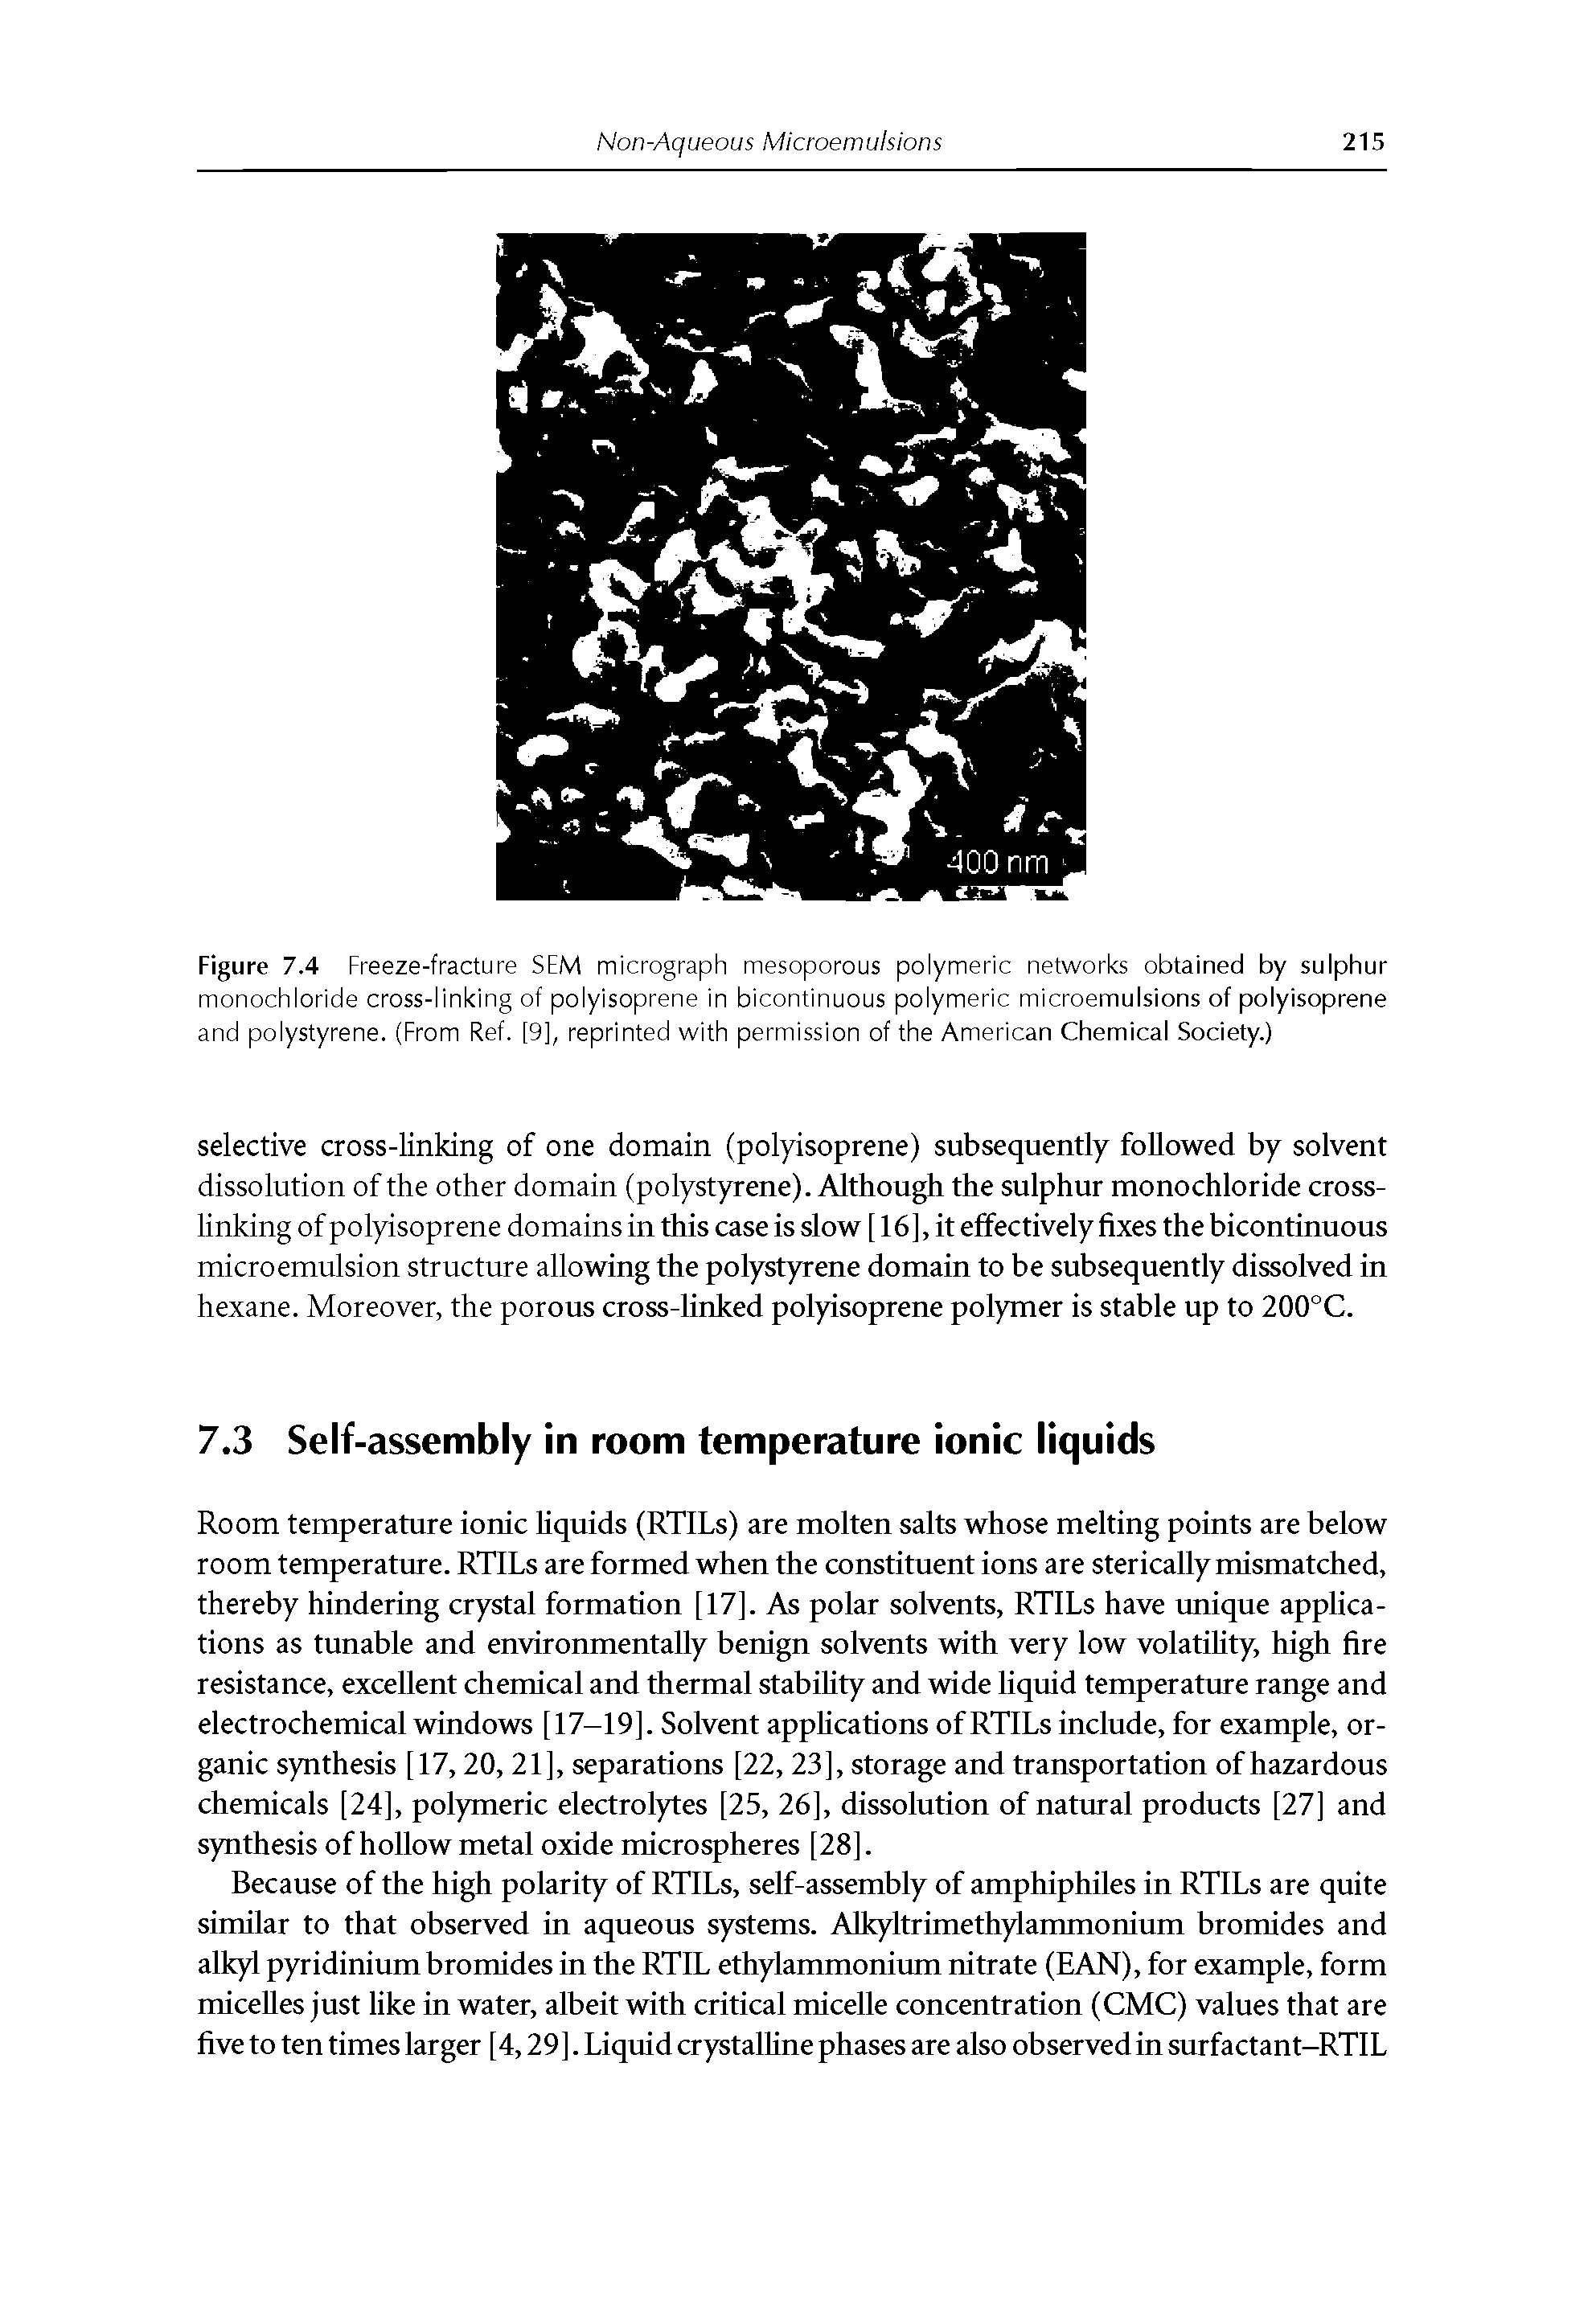 Figure 7.4 Freeze-fracture SEM micrograph mesoporous polymeric networks obtained by sulphur monochloride cross-linking of polyisoprene in bicontinuous polymeric microemulsions of polyisoprene and polystyrene. (From Ref. [9], reprinted with permission of the American Chemical Society.)...